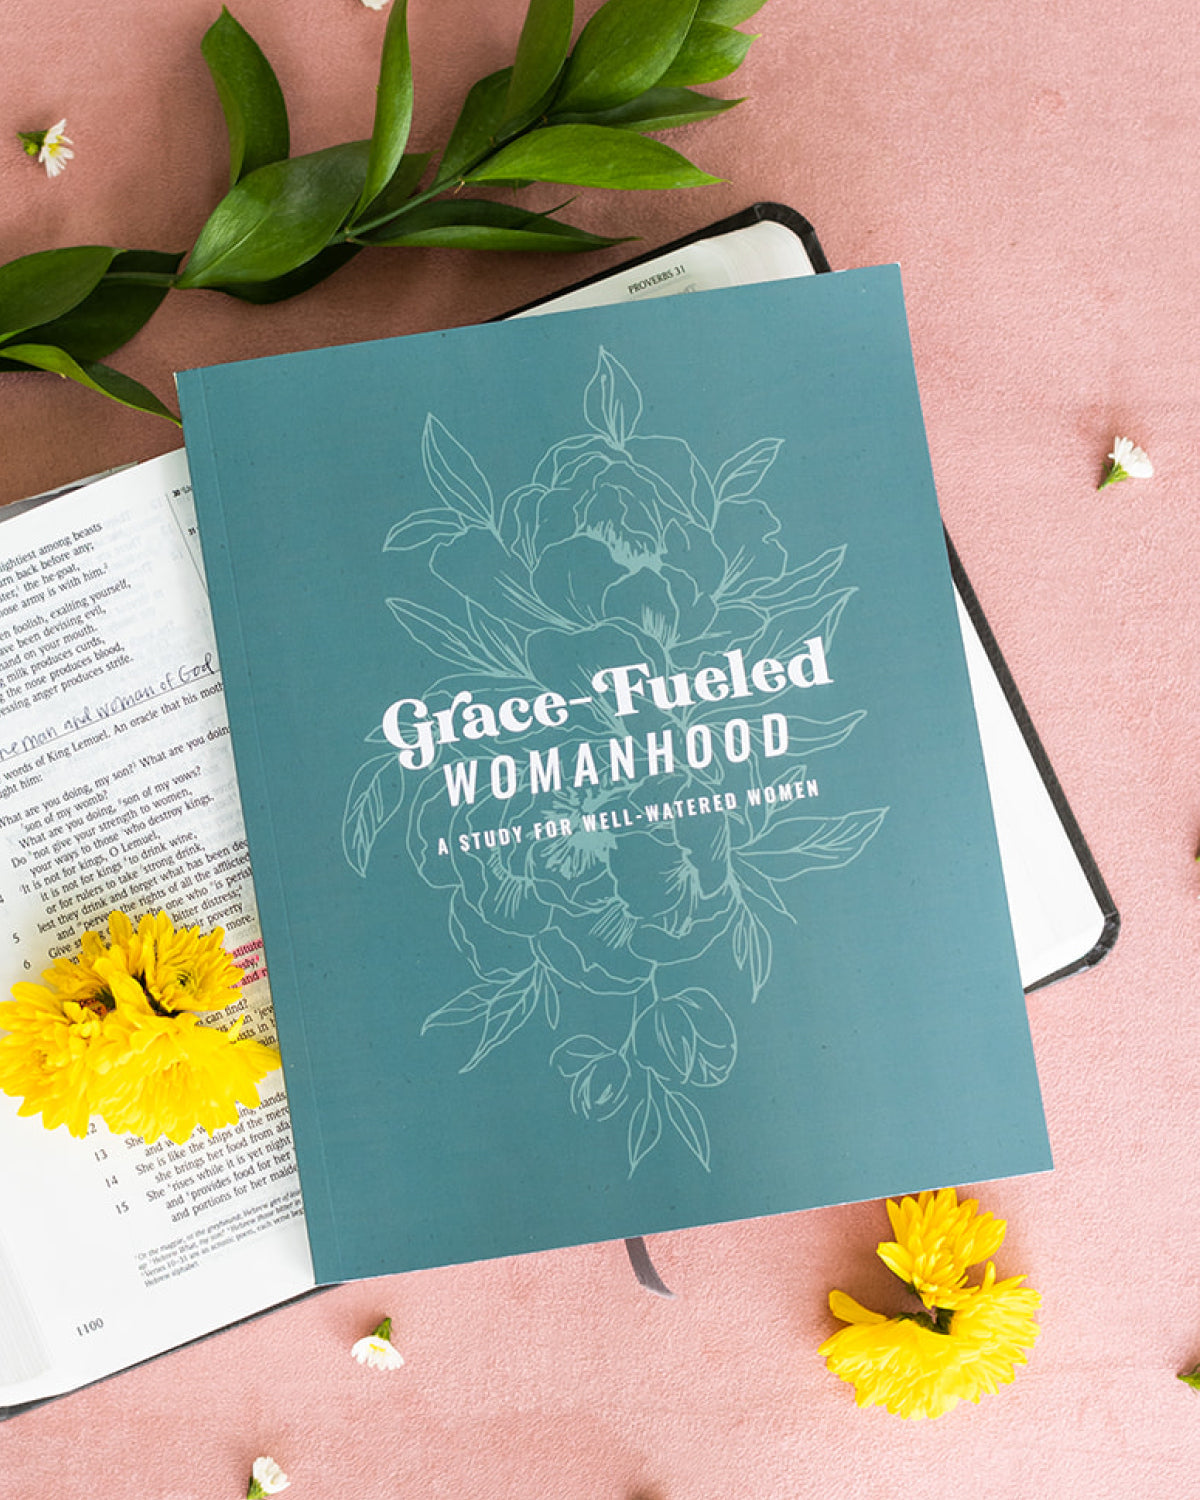 Grace-Fueled Womanhood: A Bible Study on the Proverbs 31 Woman